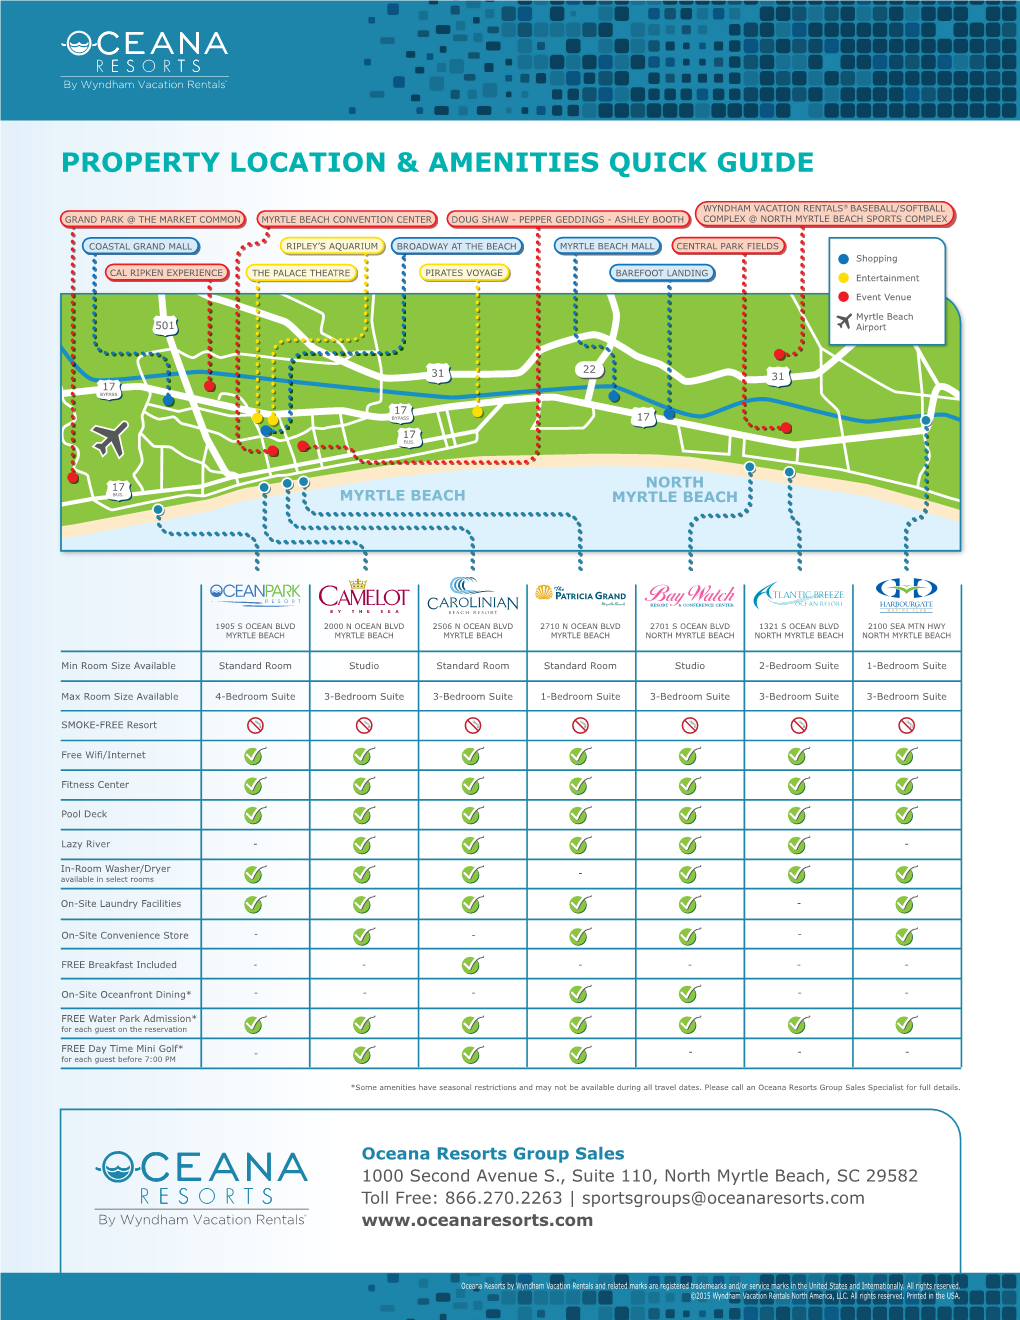 Property Location & Amenities Quick Guide